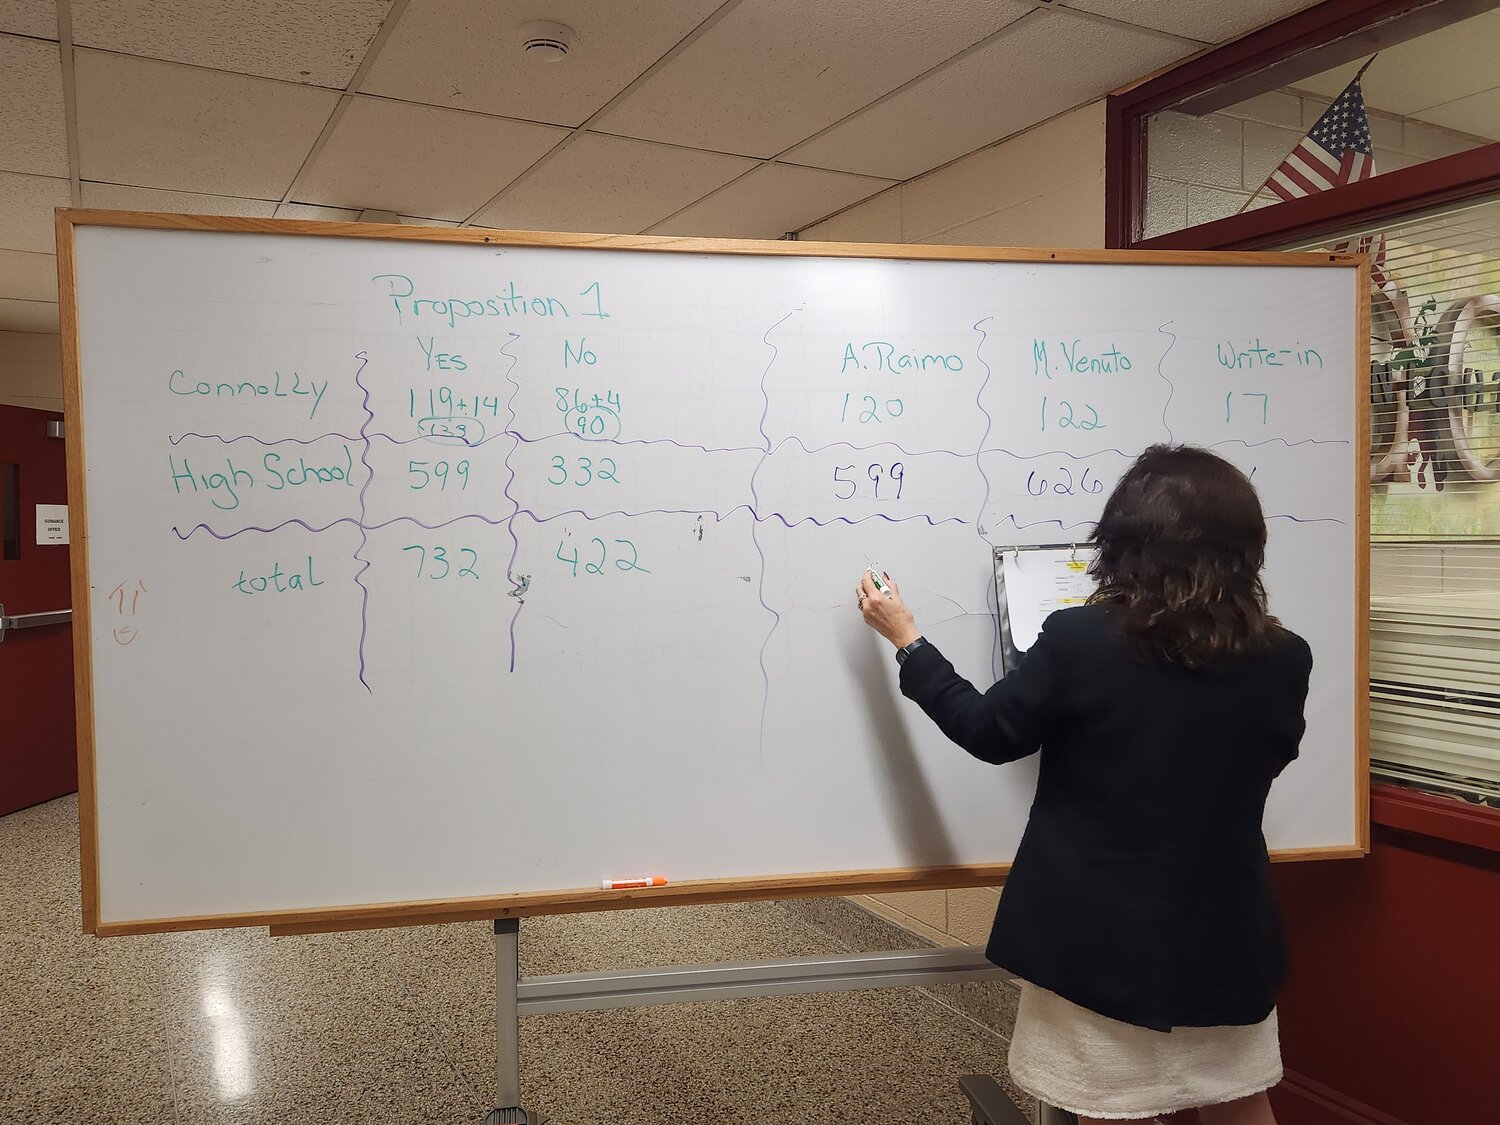 The 2023-24 Glen Cove City School district budget passed, with 733 voters in favor and 423 in opposition. Superintendent Maria Rianna posted the results 45 minutes after polls closed.